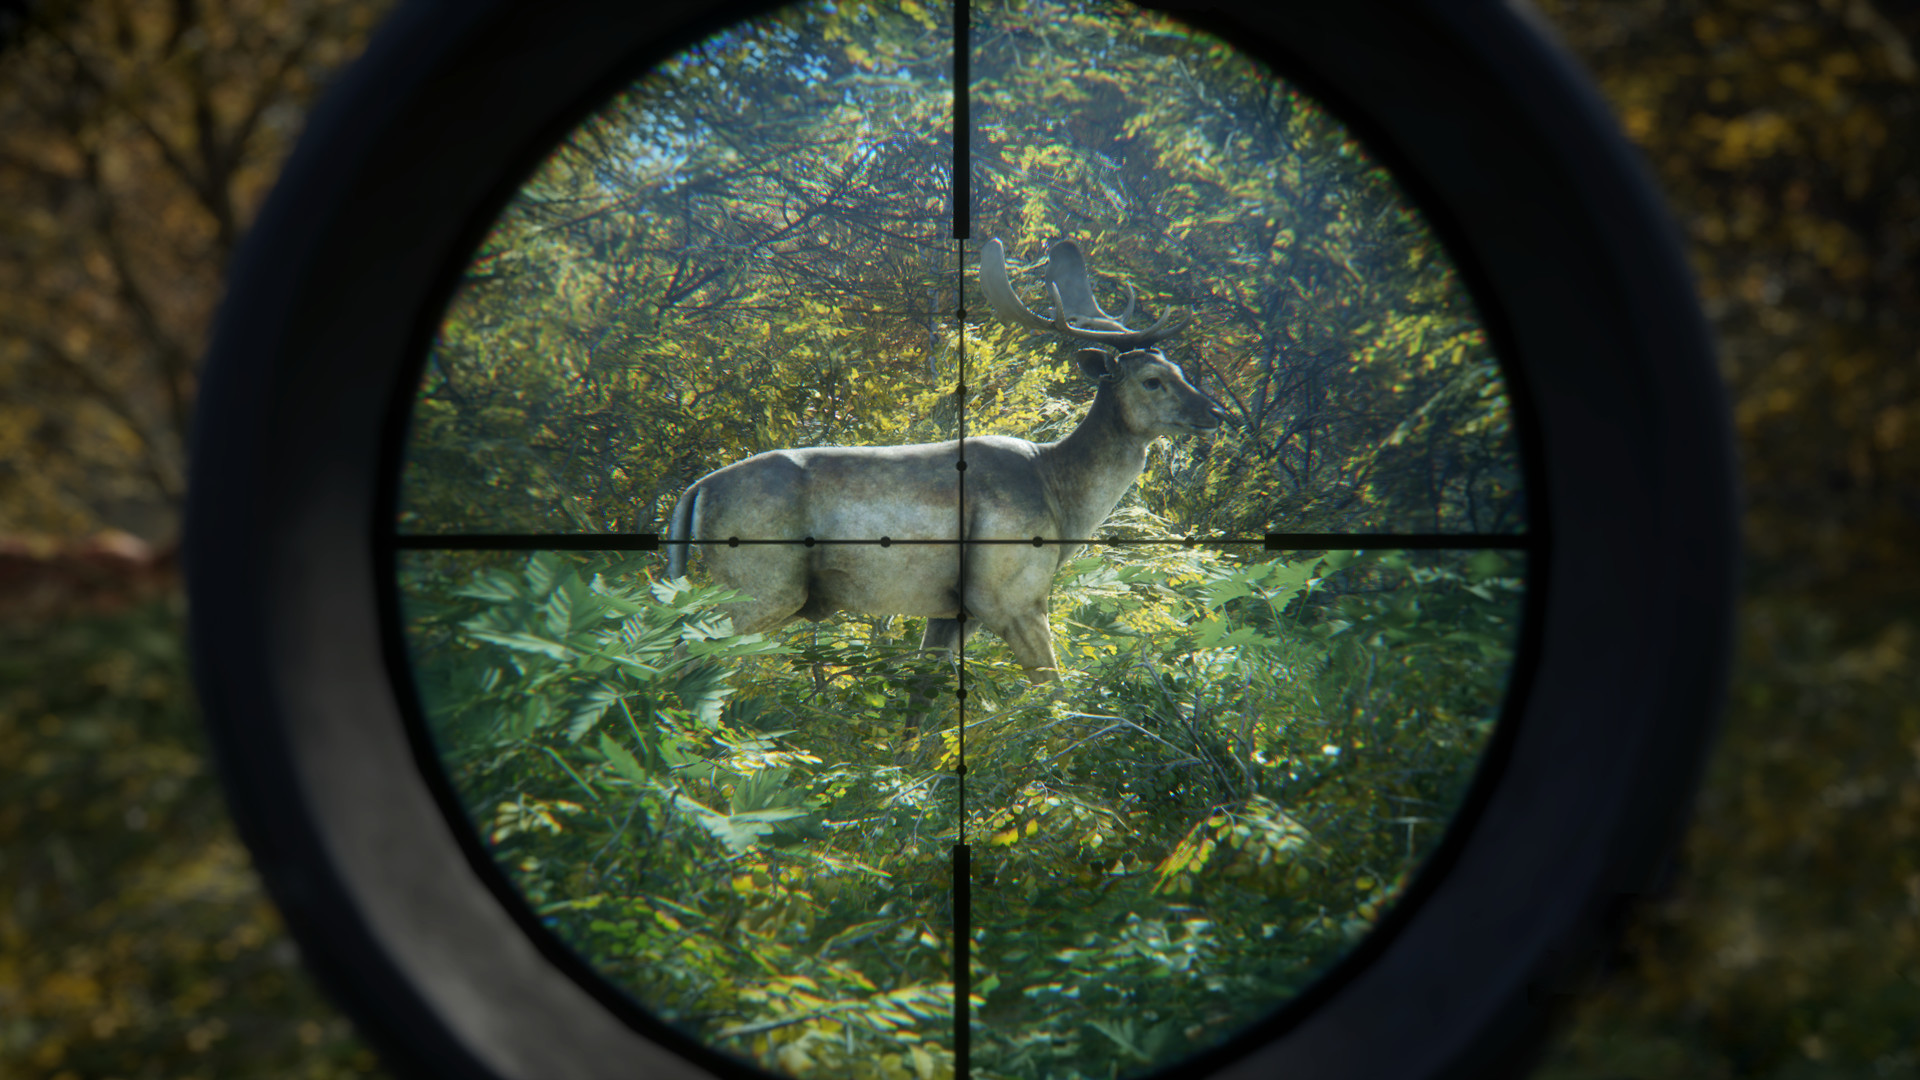 theHunter: Call of the Wild system requirements